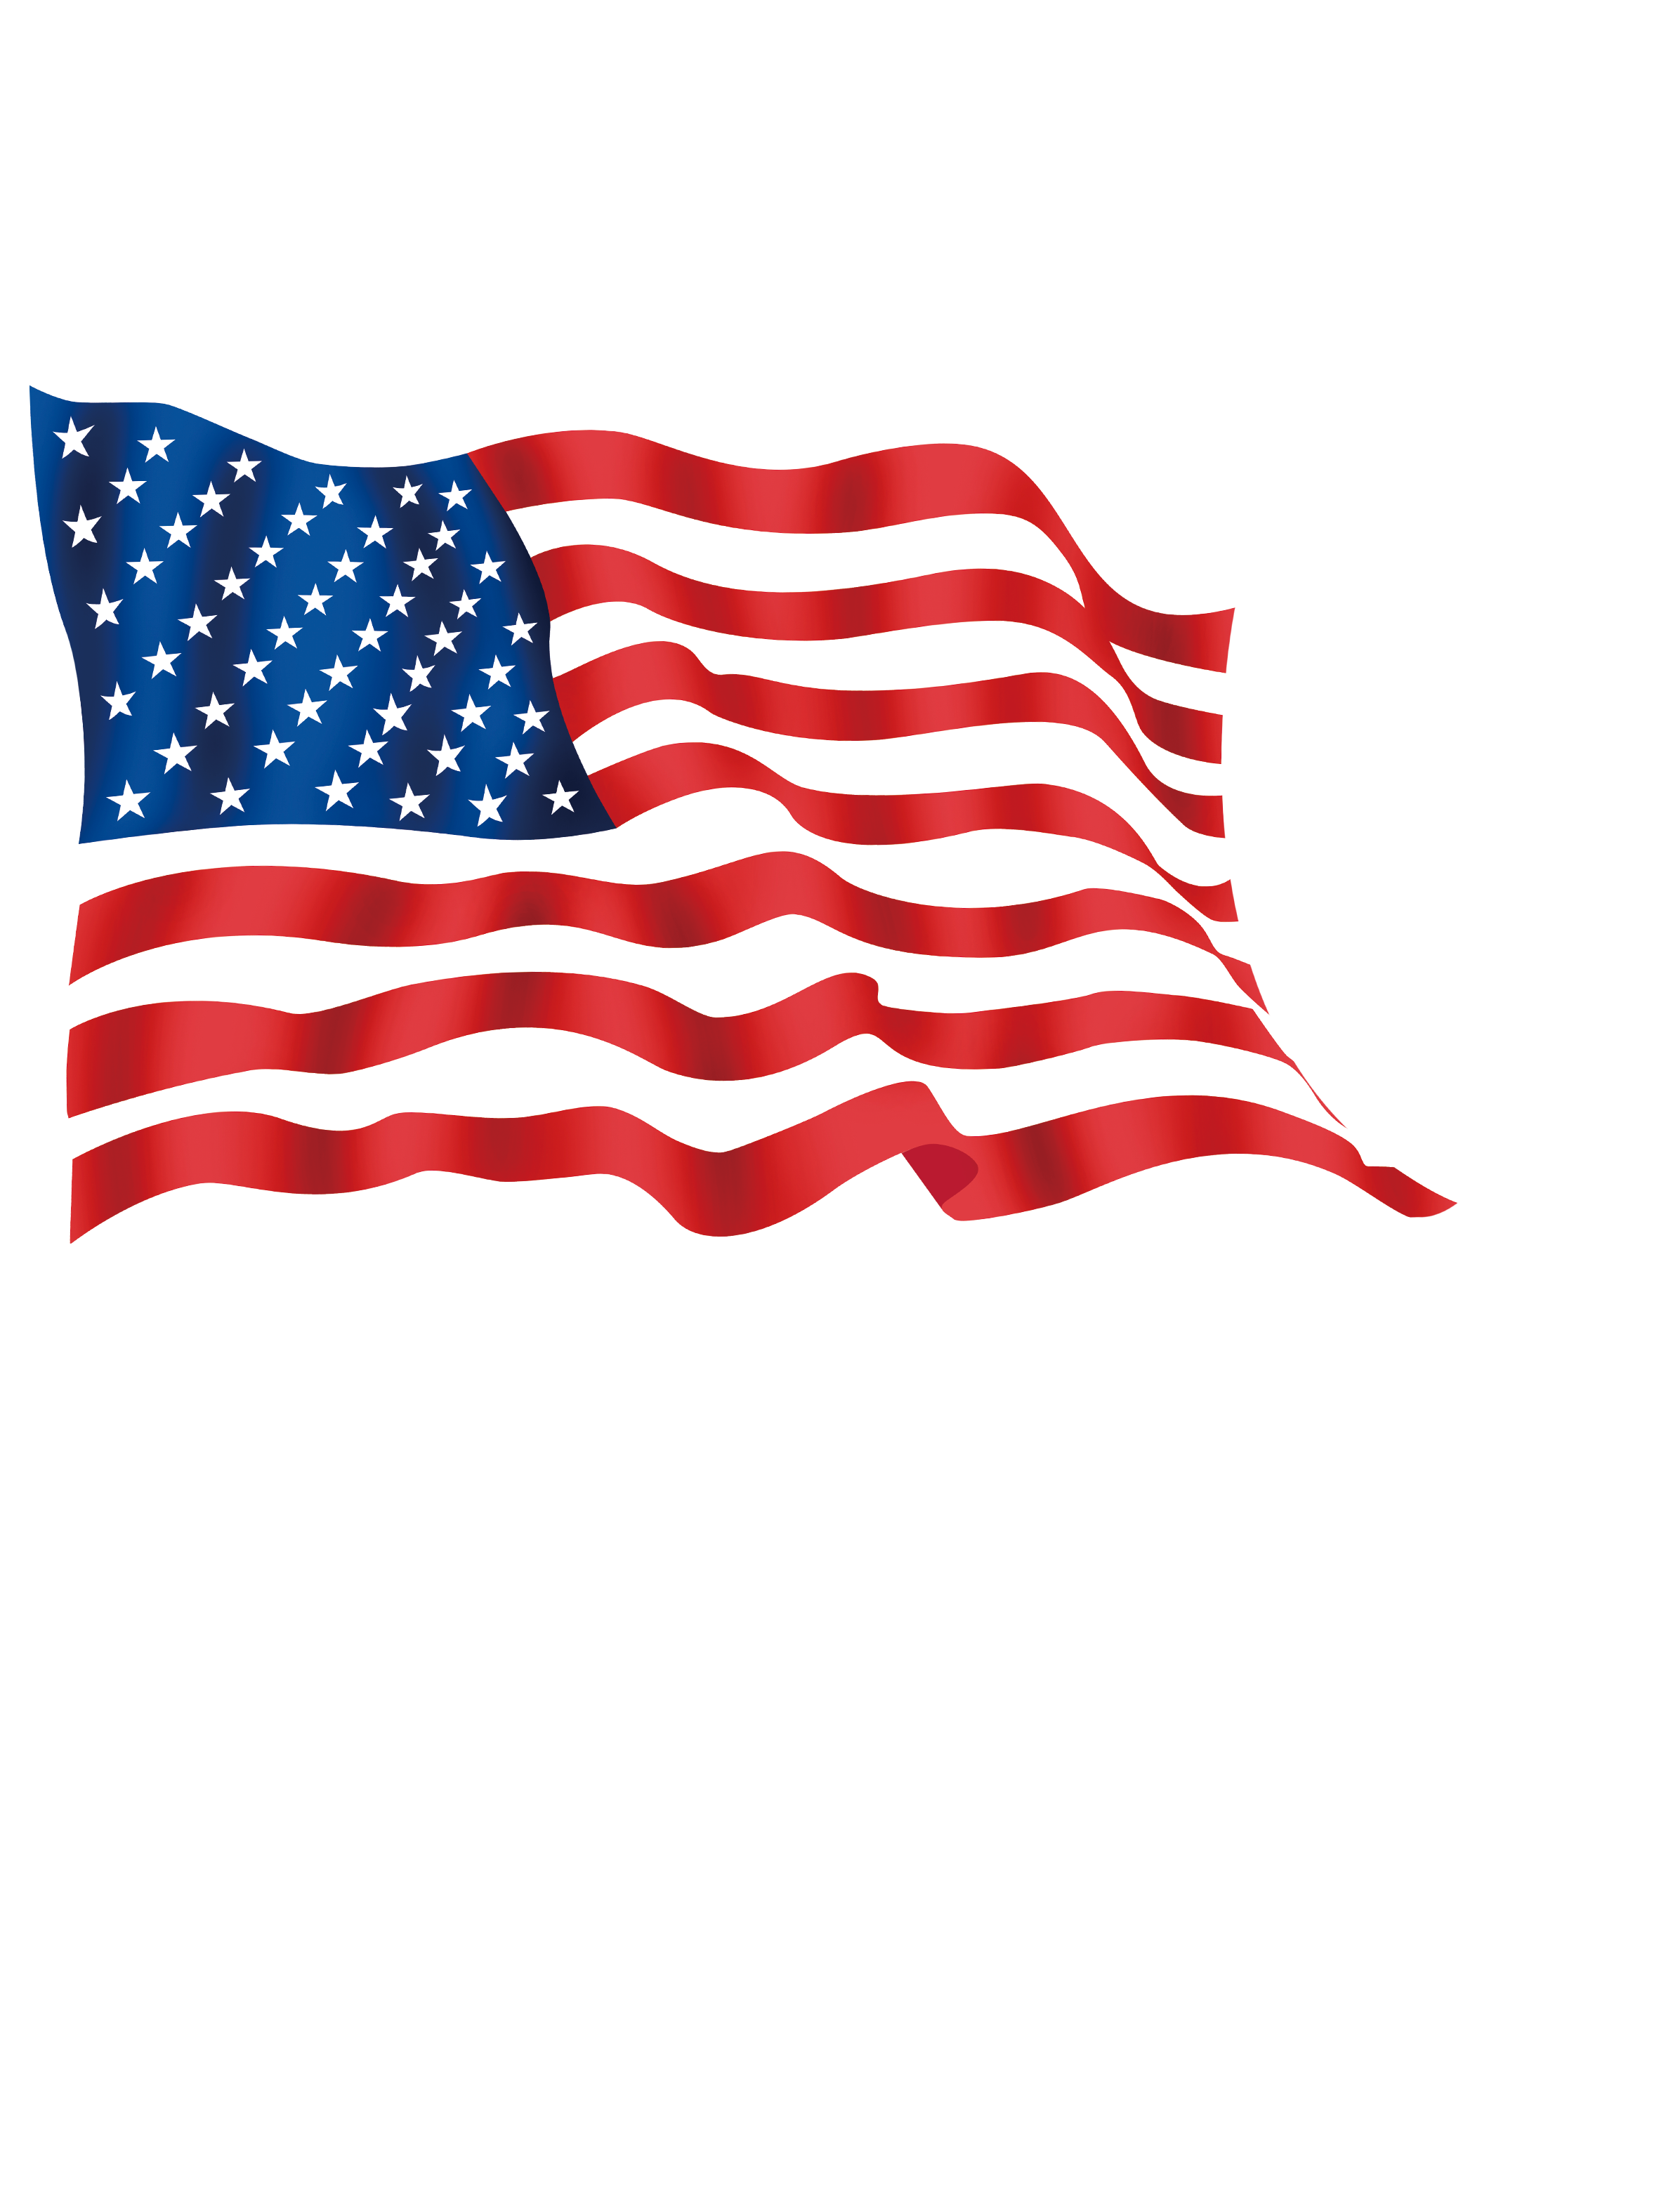 Flag of the United States Clip art - American flag png download - 2362